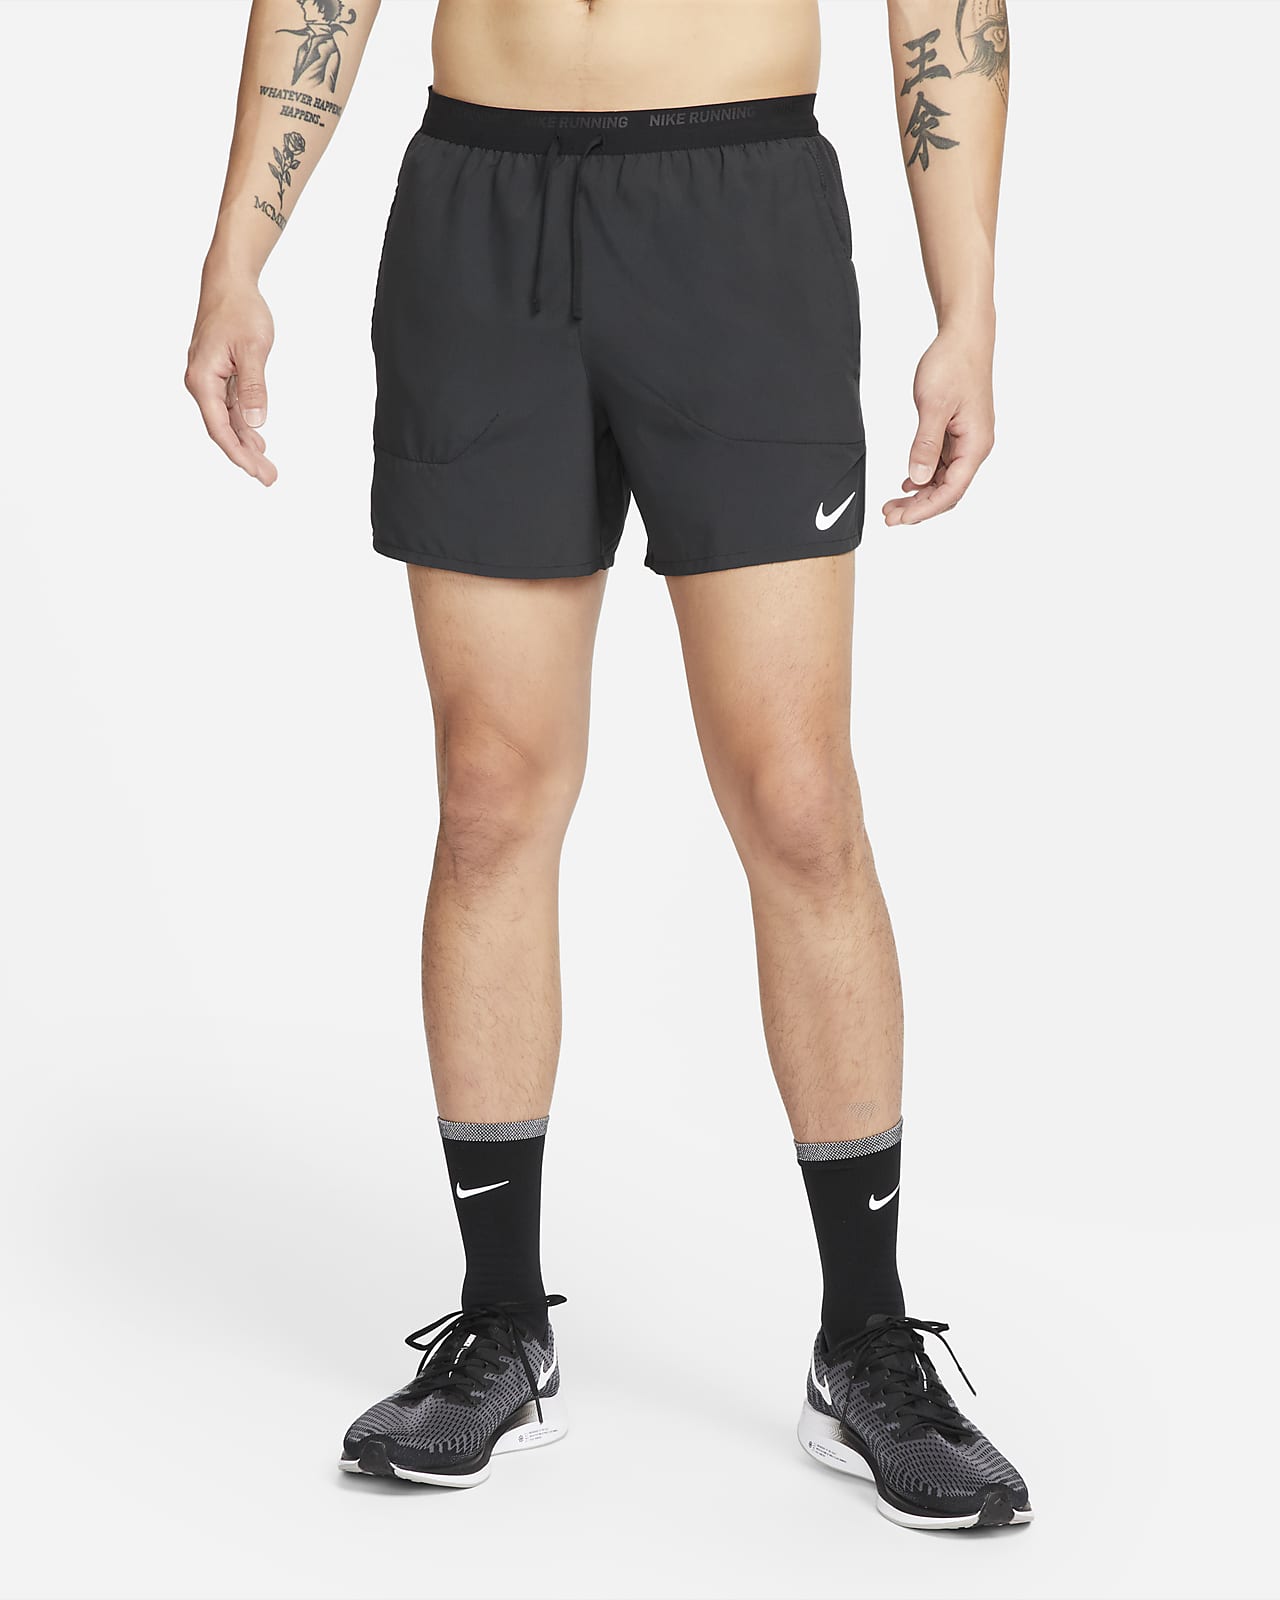 Nike Dri-FIT Stride Men's Brief-Lined Shorts. Nike